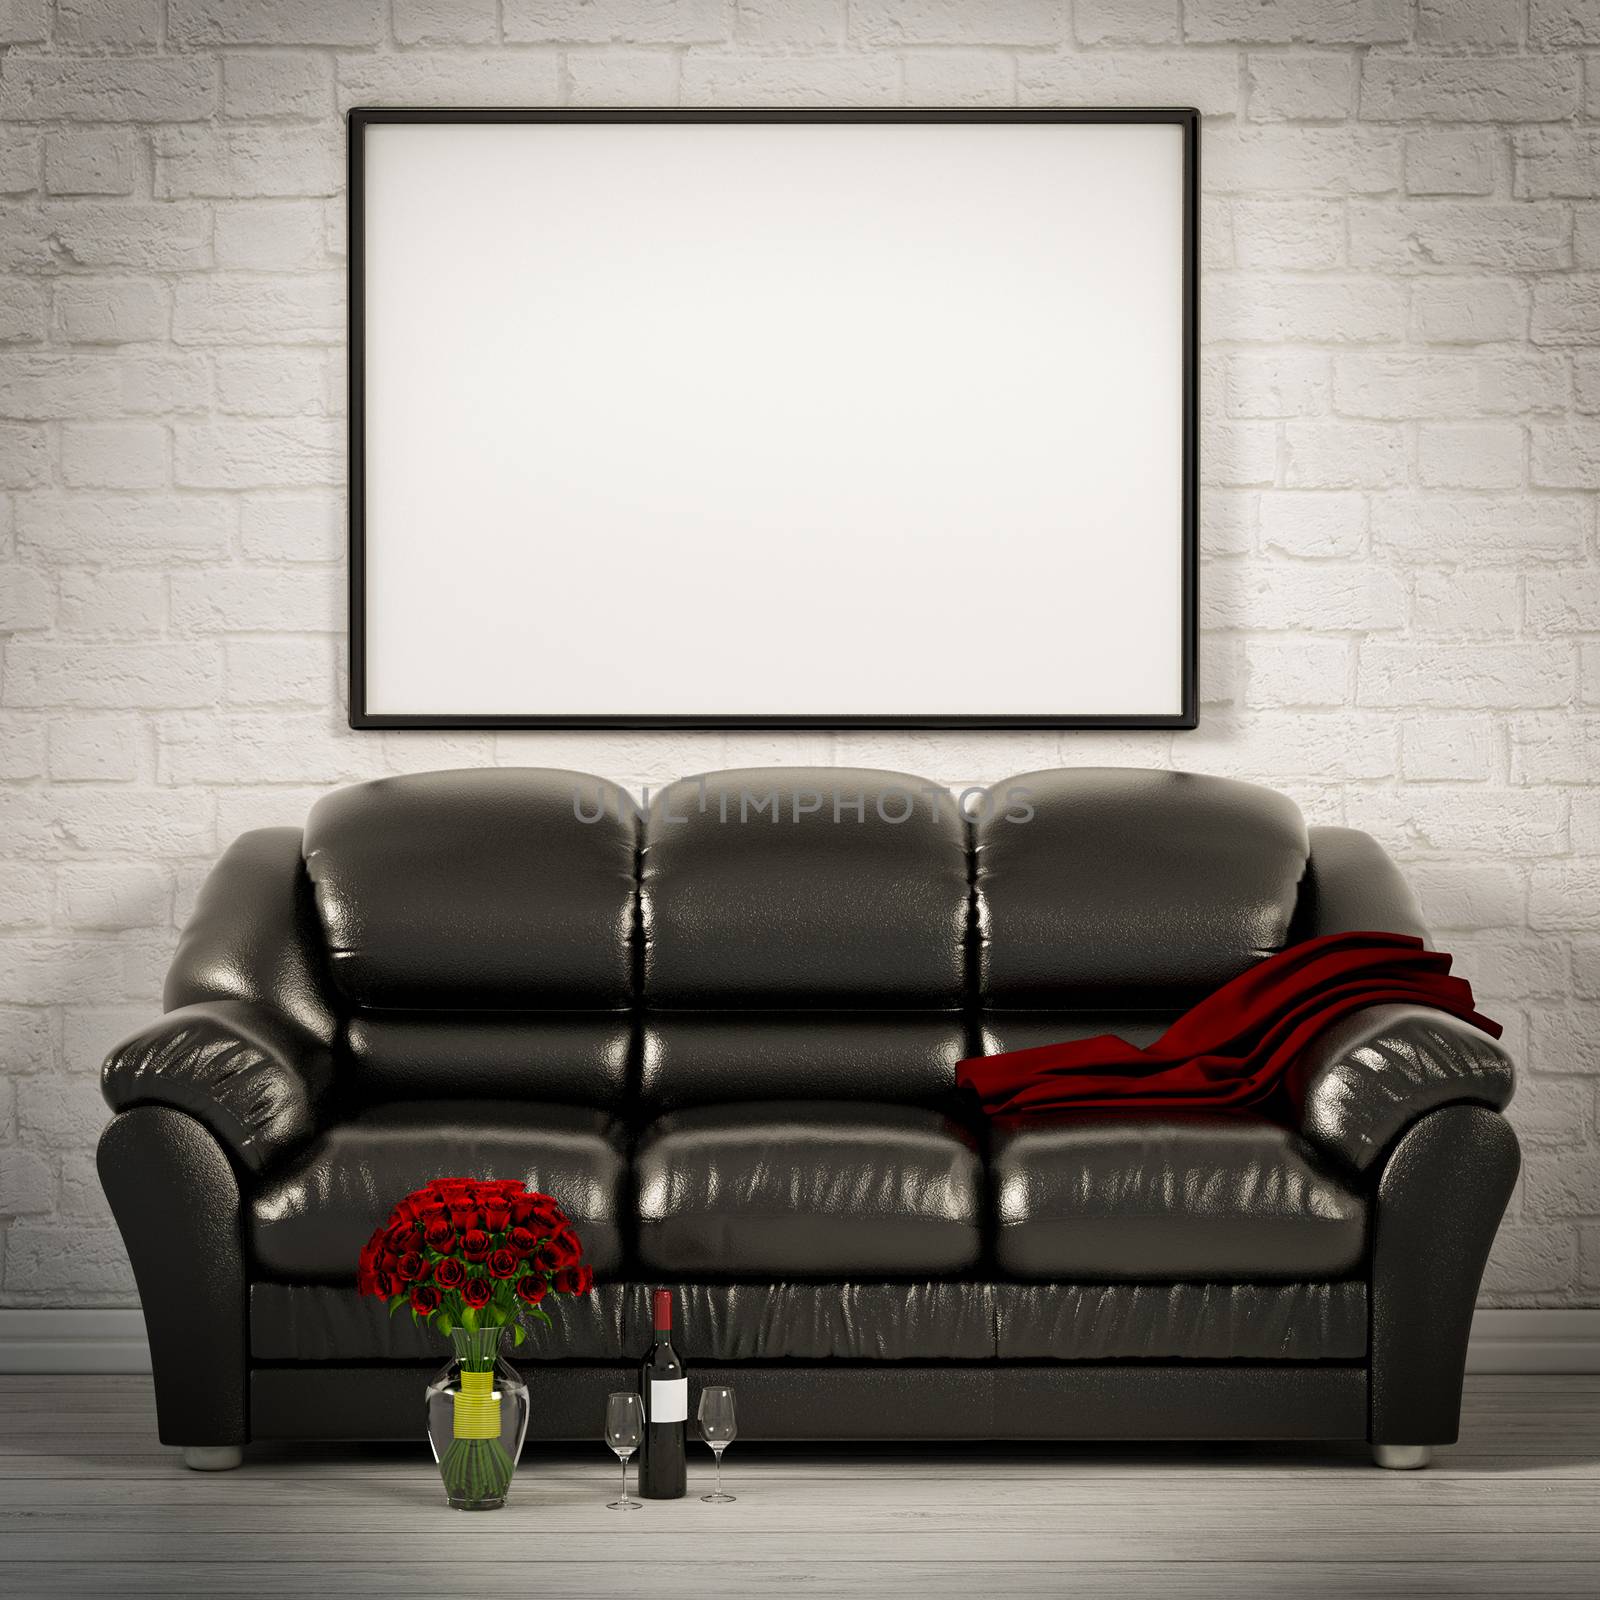 living white room with leather sofa 3d illustration